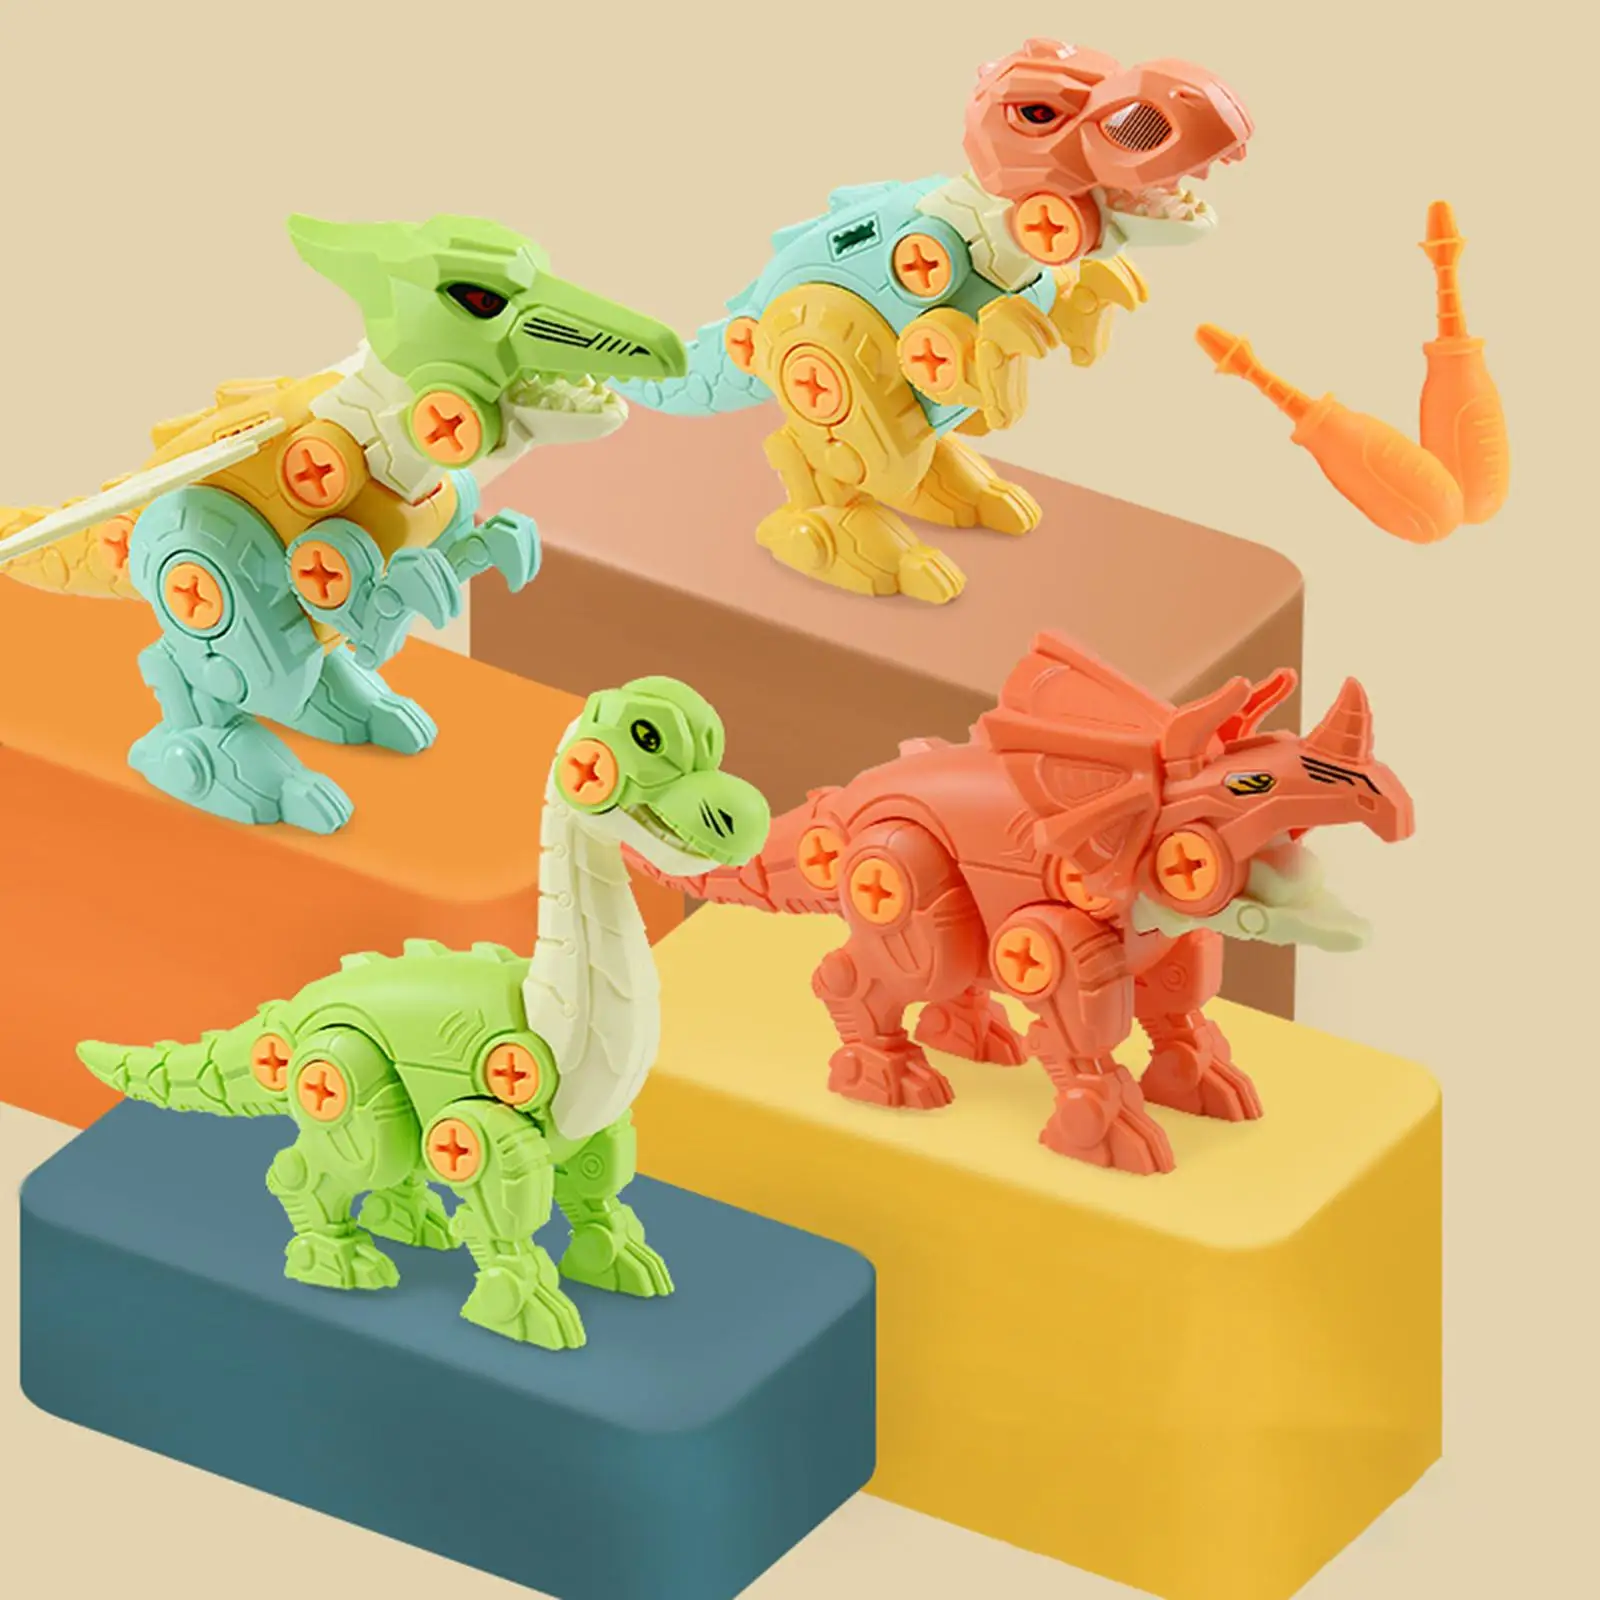 4 Pieces Dinosaur Toys Kit with Flexible Joints Building Toy Birthday Gifts for Kids Toddlers